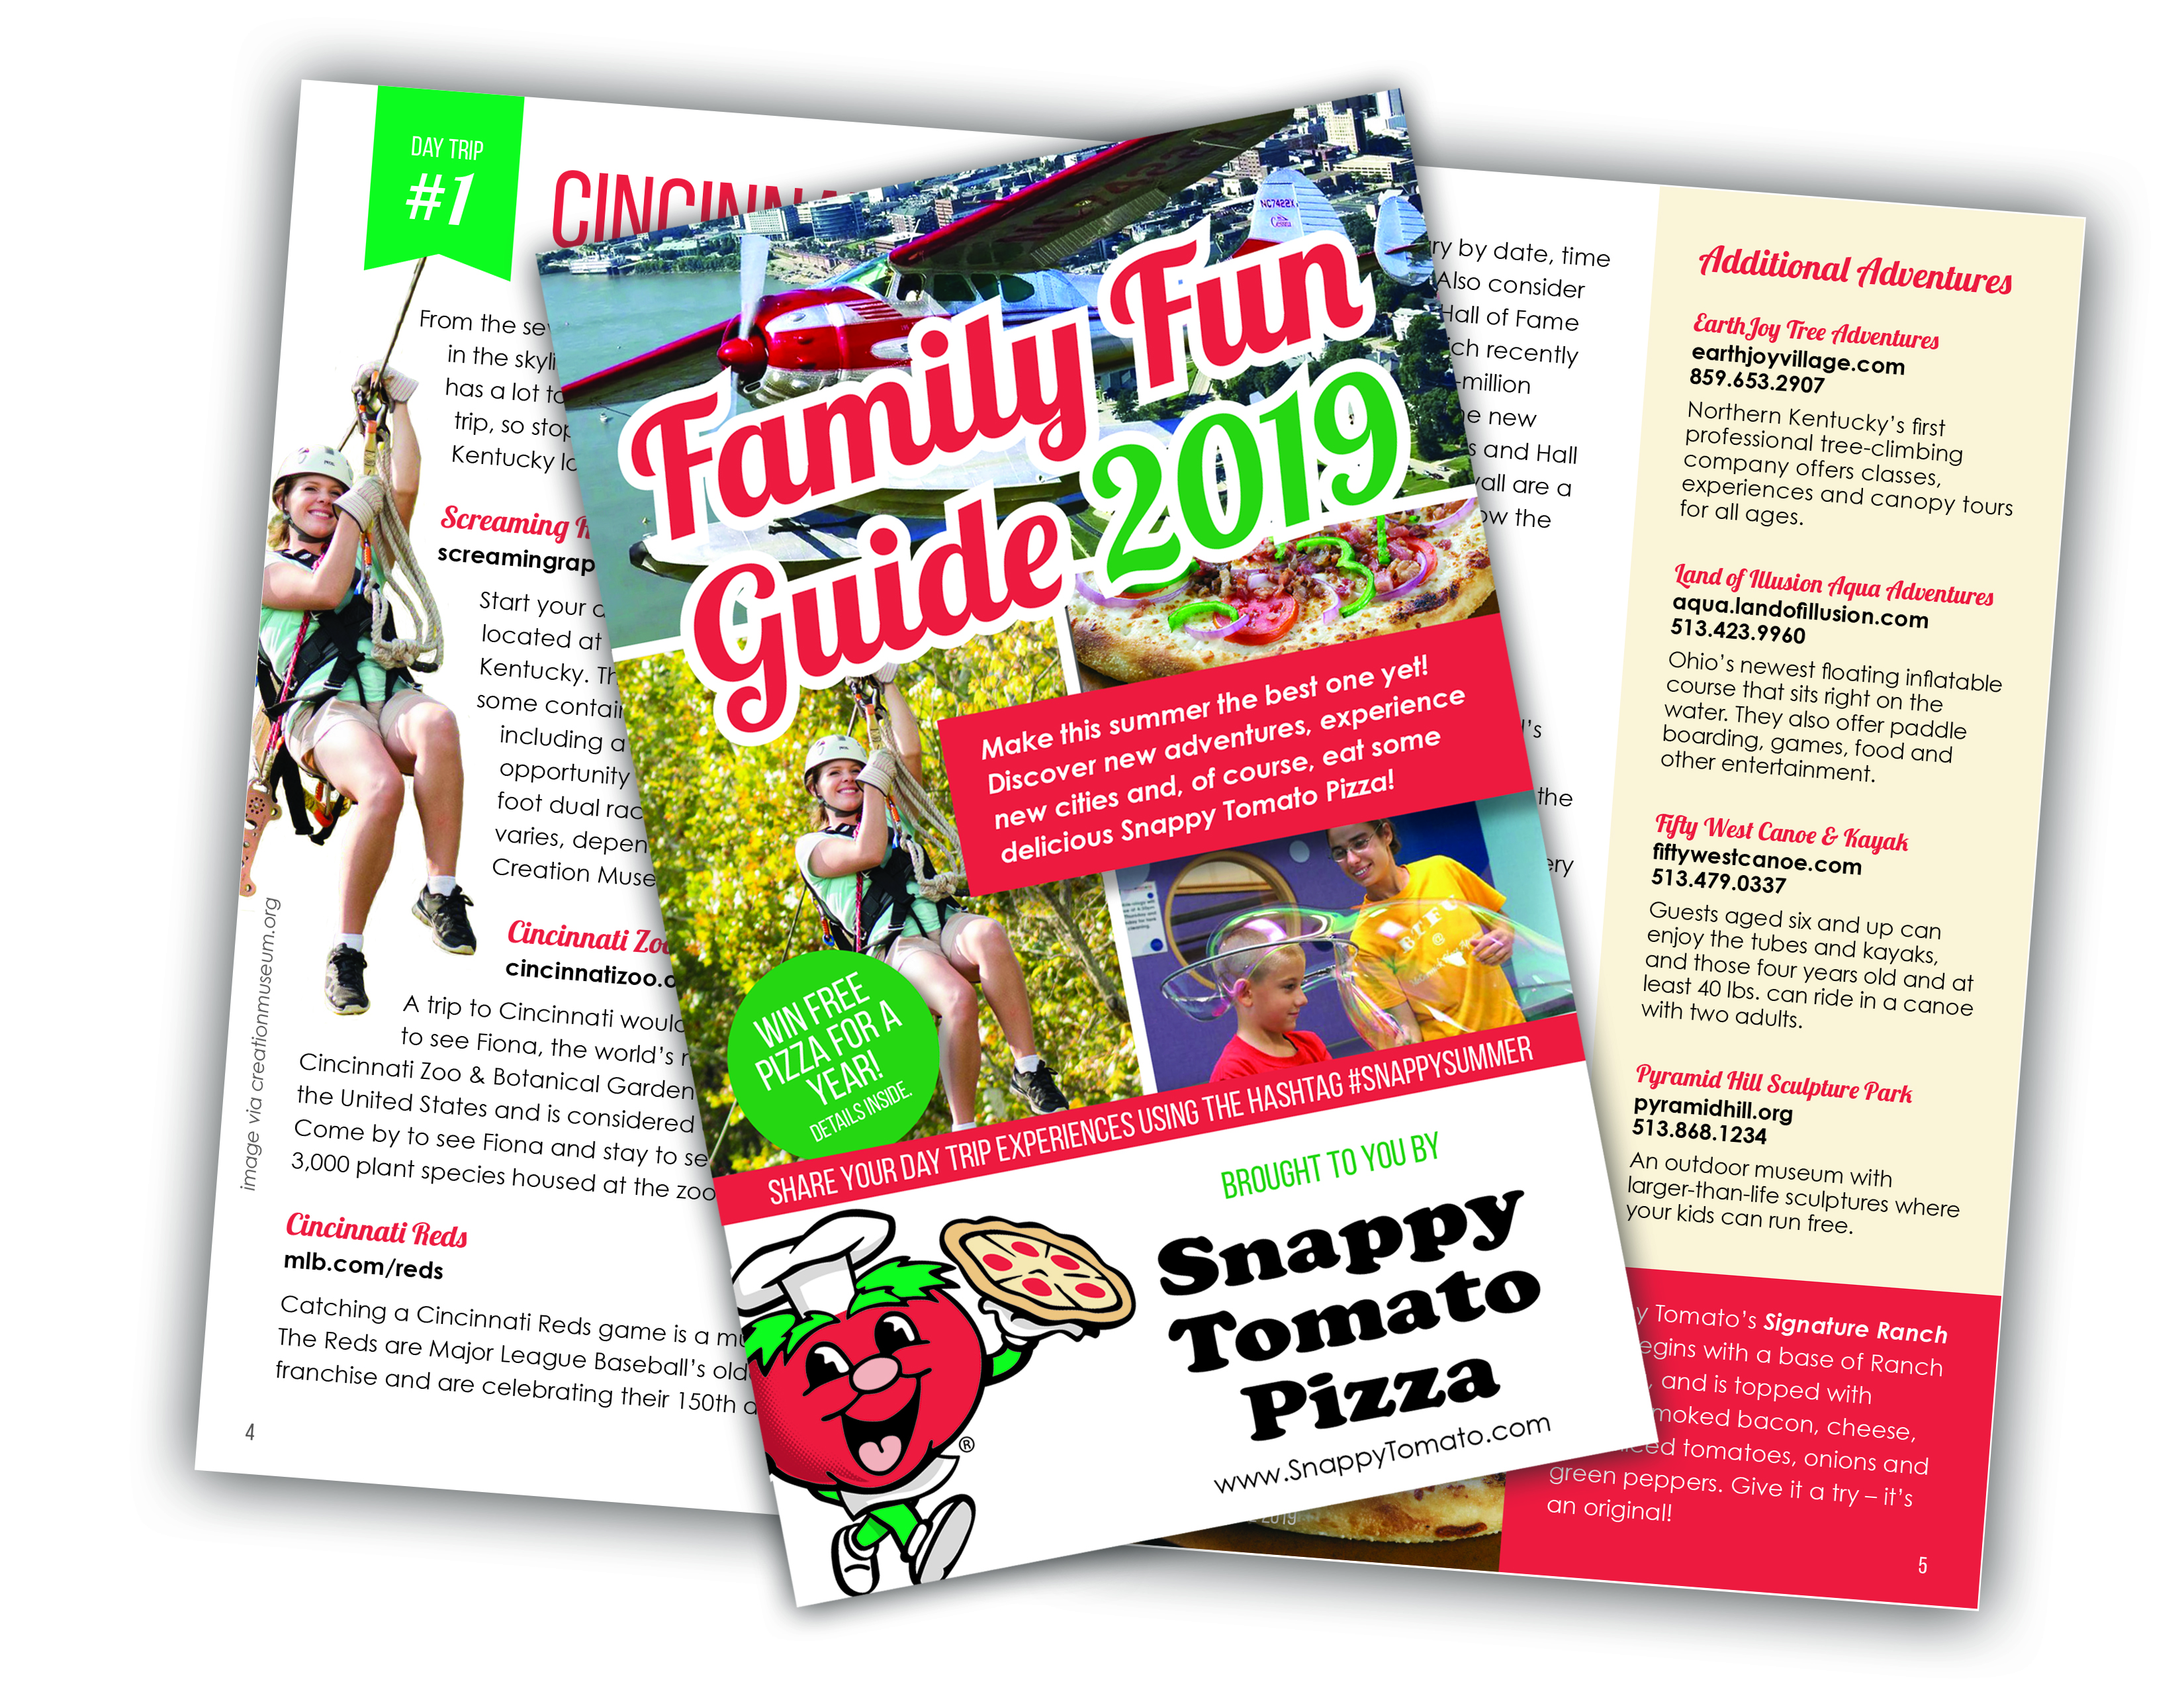 Family Fun Guide 2019 Image:
Snappy Tomato Pizza Family Fun Guide 2019 - A 16-page Family Focused Day Trip Travel Guide including Knoxville, Tennessee; Rabbit Hash, Kentucky; Cincinnati, Ohio; Columbus, Indiana; and Adams County, Ohio. #SnappySummer - www.SnappyTomato.com
#Winner #Pizza #SnappySummer
